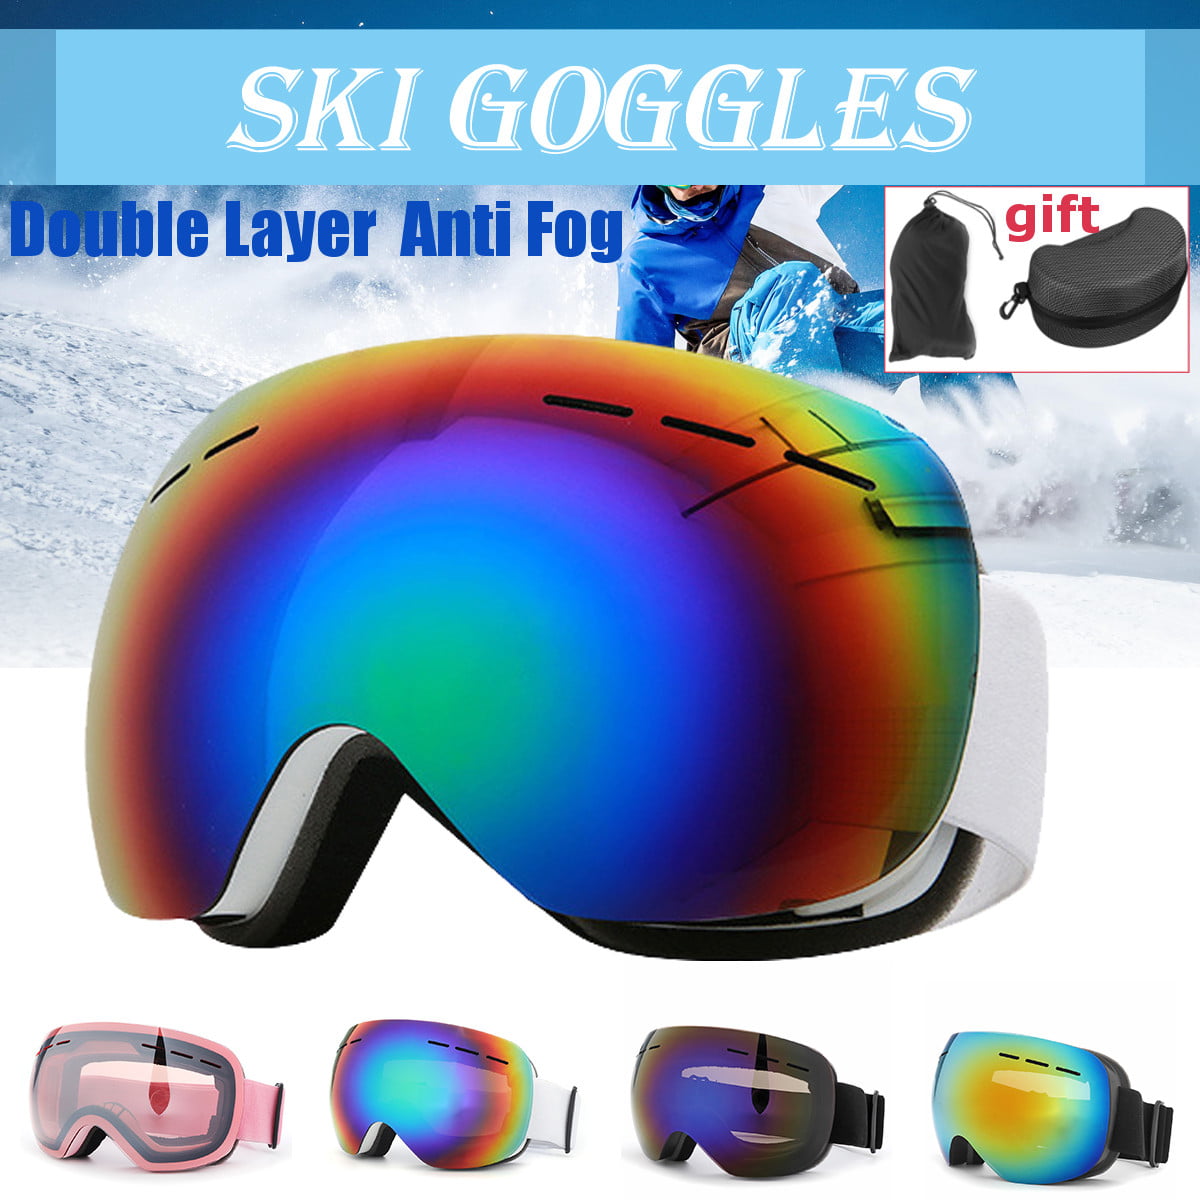 Snow Ski Goggles Anti Fog Dual Lens UV Protection 3 Layers Foam with Pouch 